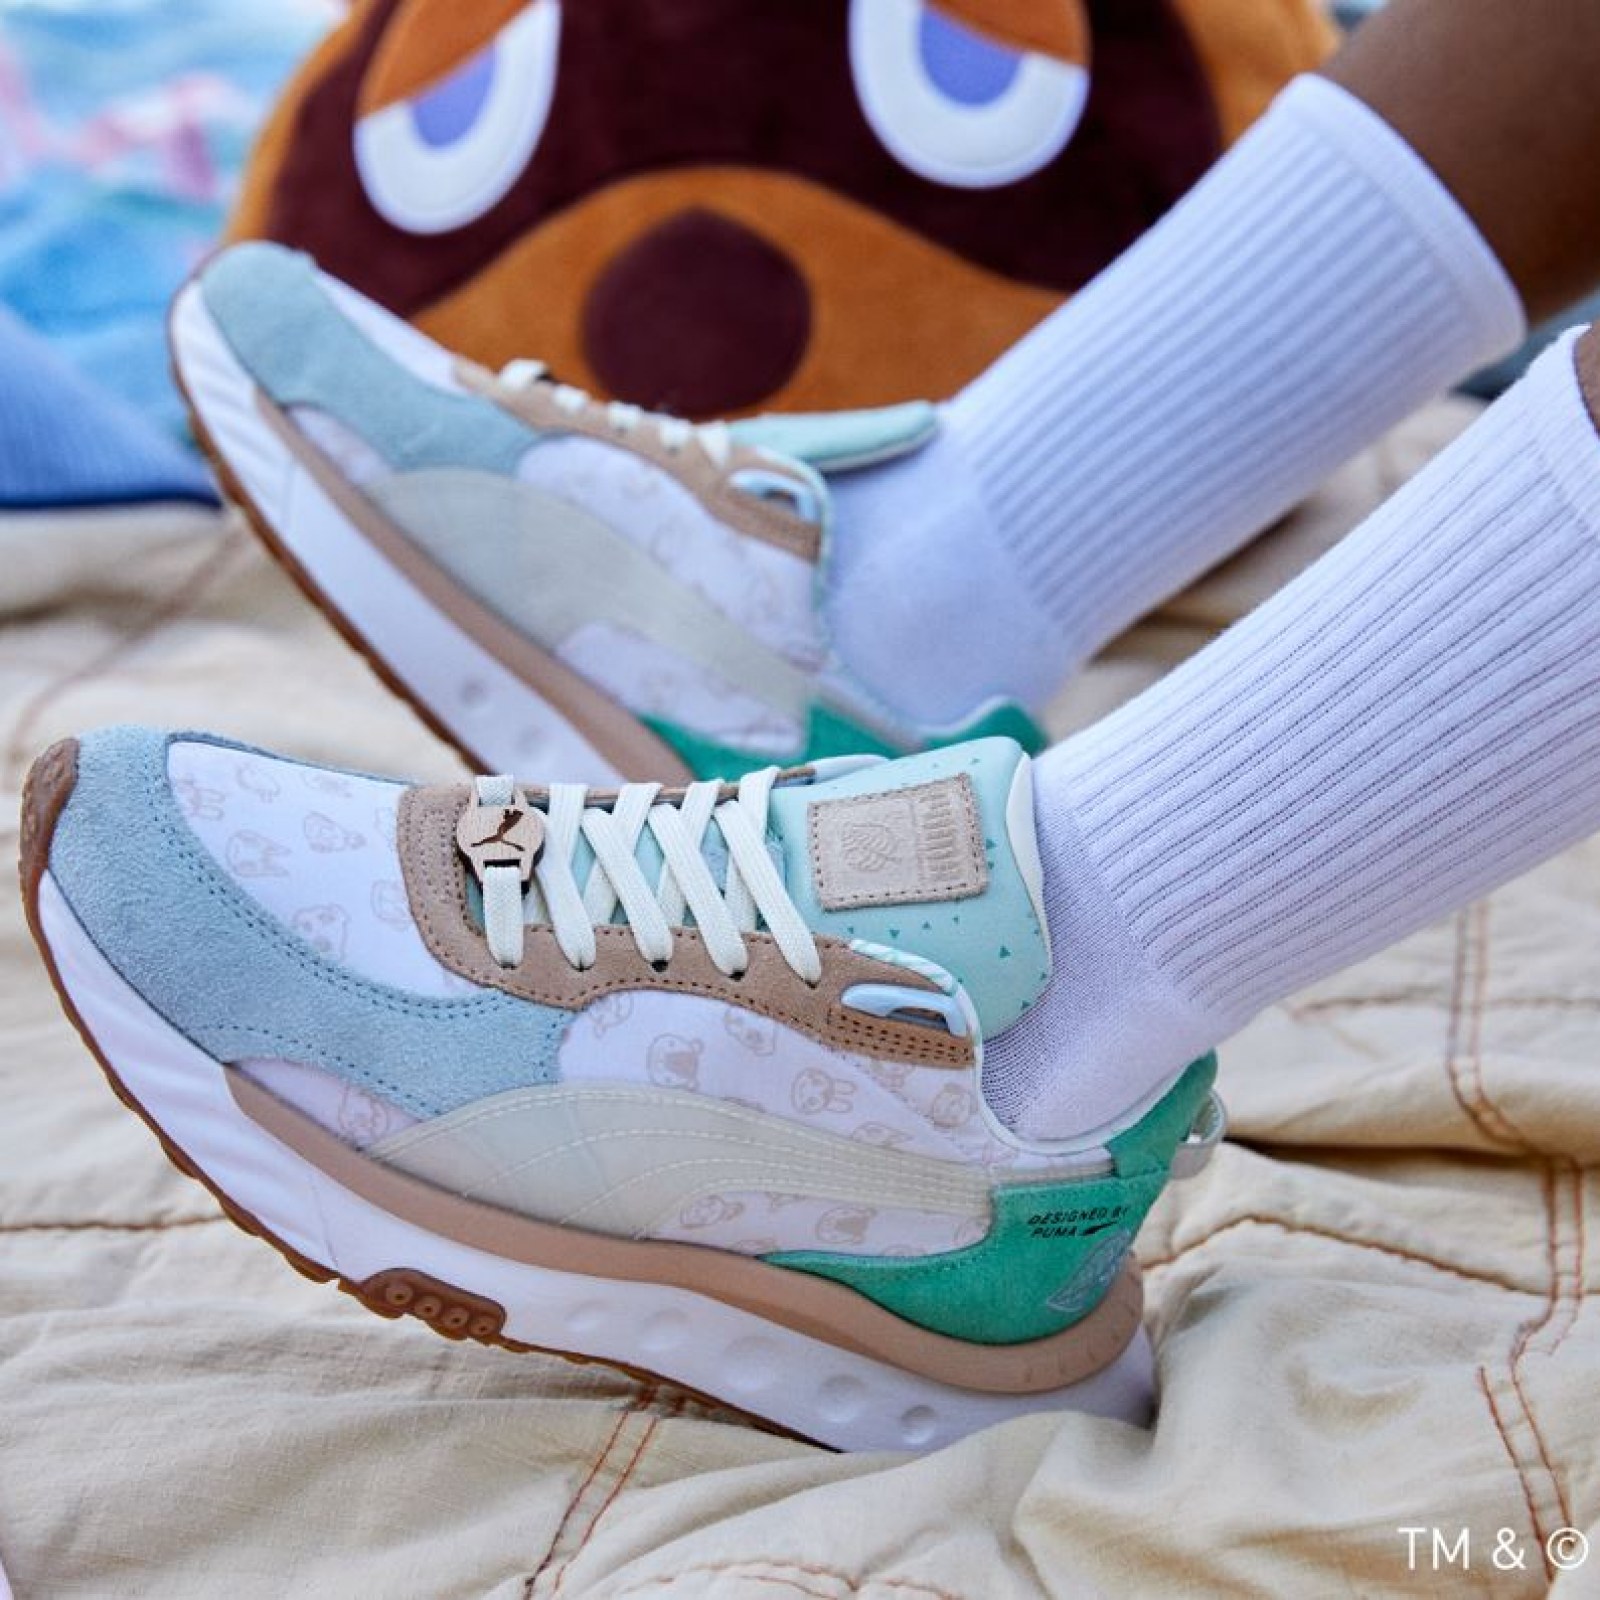 Animal Crossing X Puma Collection: Full Lineup Where To Buy Animal ...